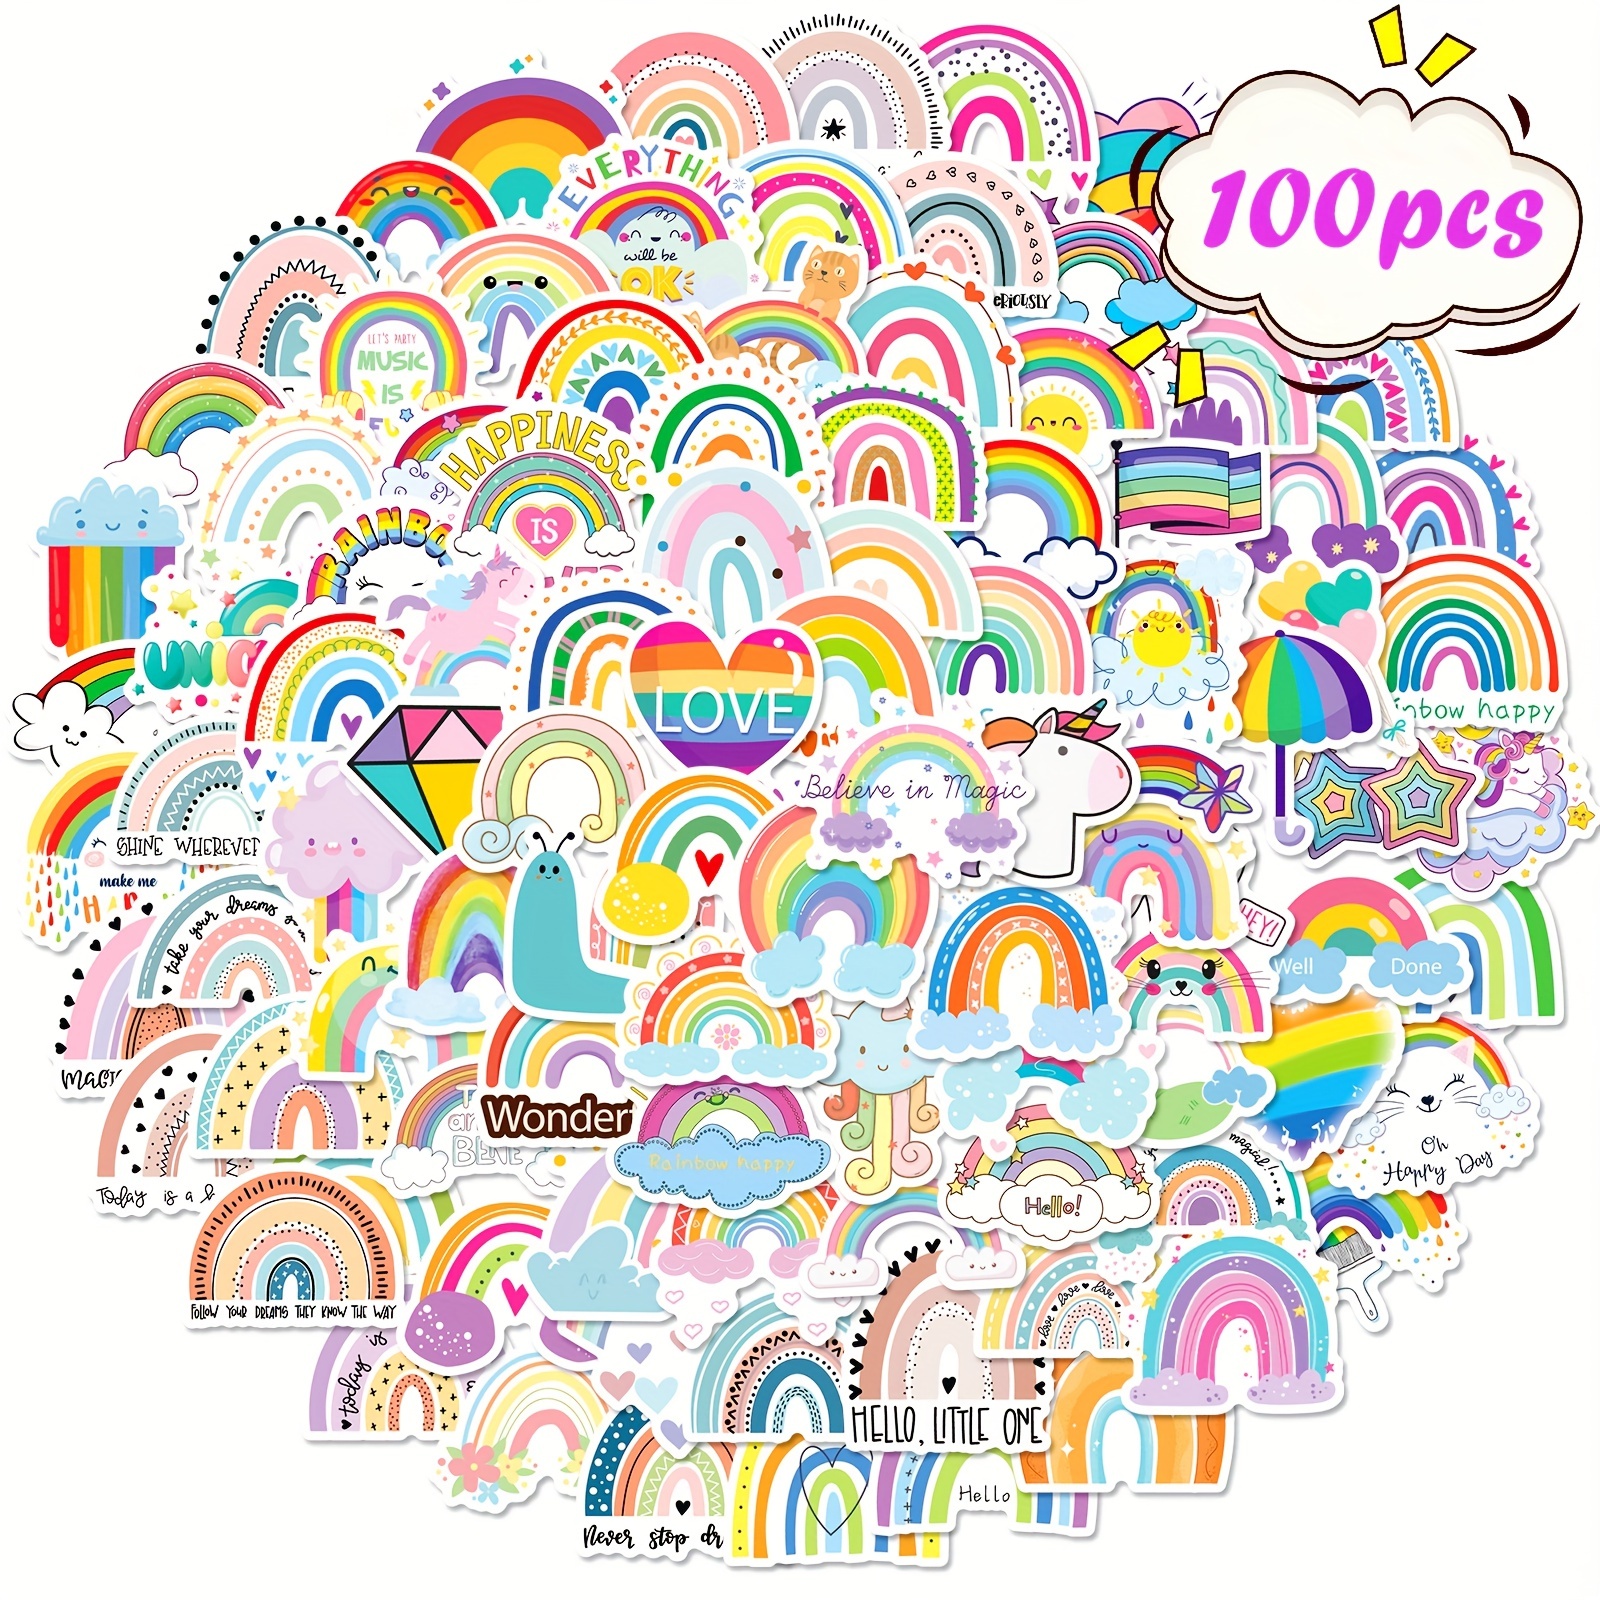 100pcs Rainbow Stickers Colorful Pride Boho Rainbow Decals Waterproof Vinyl Sticker Decoration Stickers for Laptop Skateboard Luggage Guitar